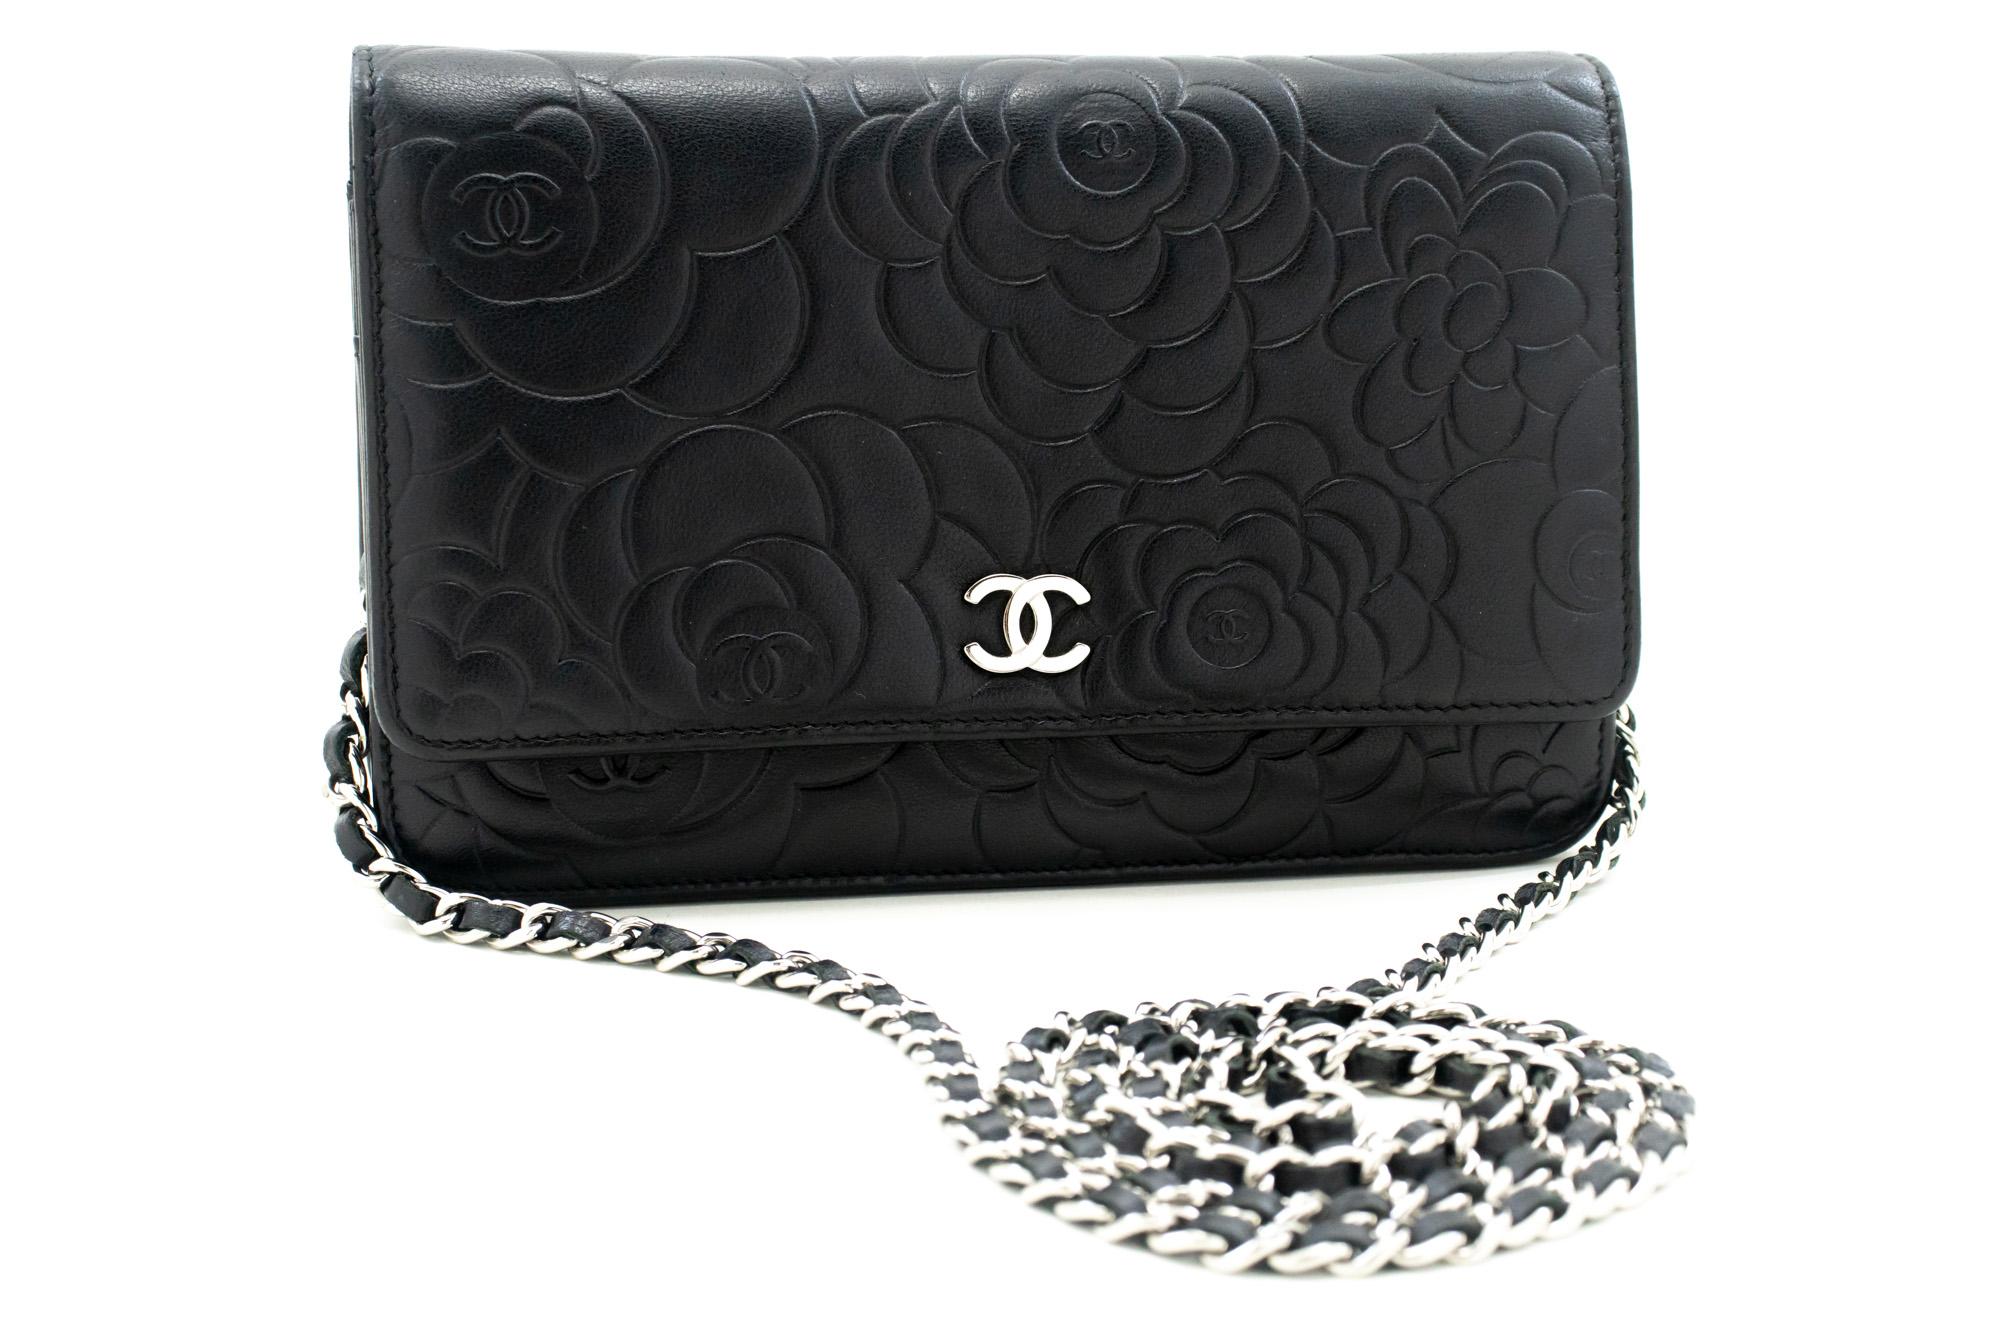 An authentic CHANEL Black Camellia Embossed Wallet On Chain WOC Shoulder Bag Silver. The color is Black. The outside material is Leather. The pattern is Embossed. This item is Contemporary. The year of manufacture would be 2014.
Conditions &